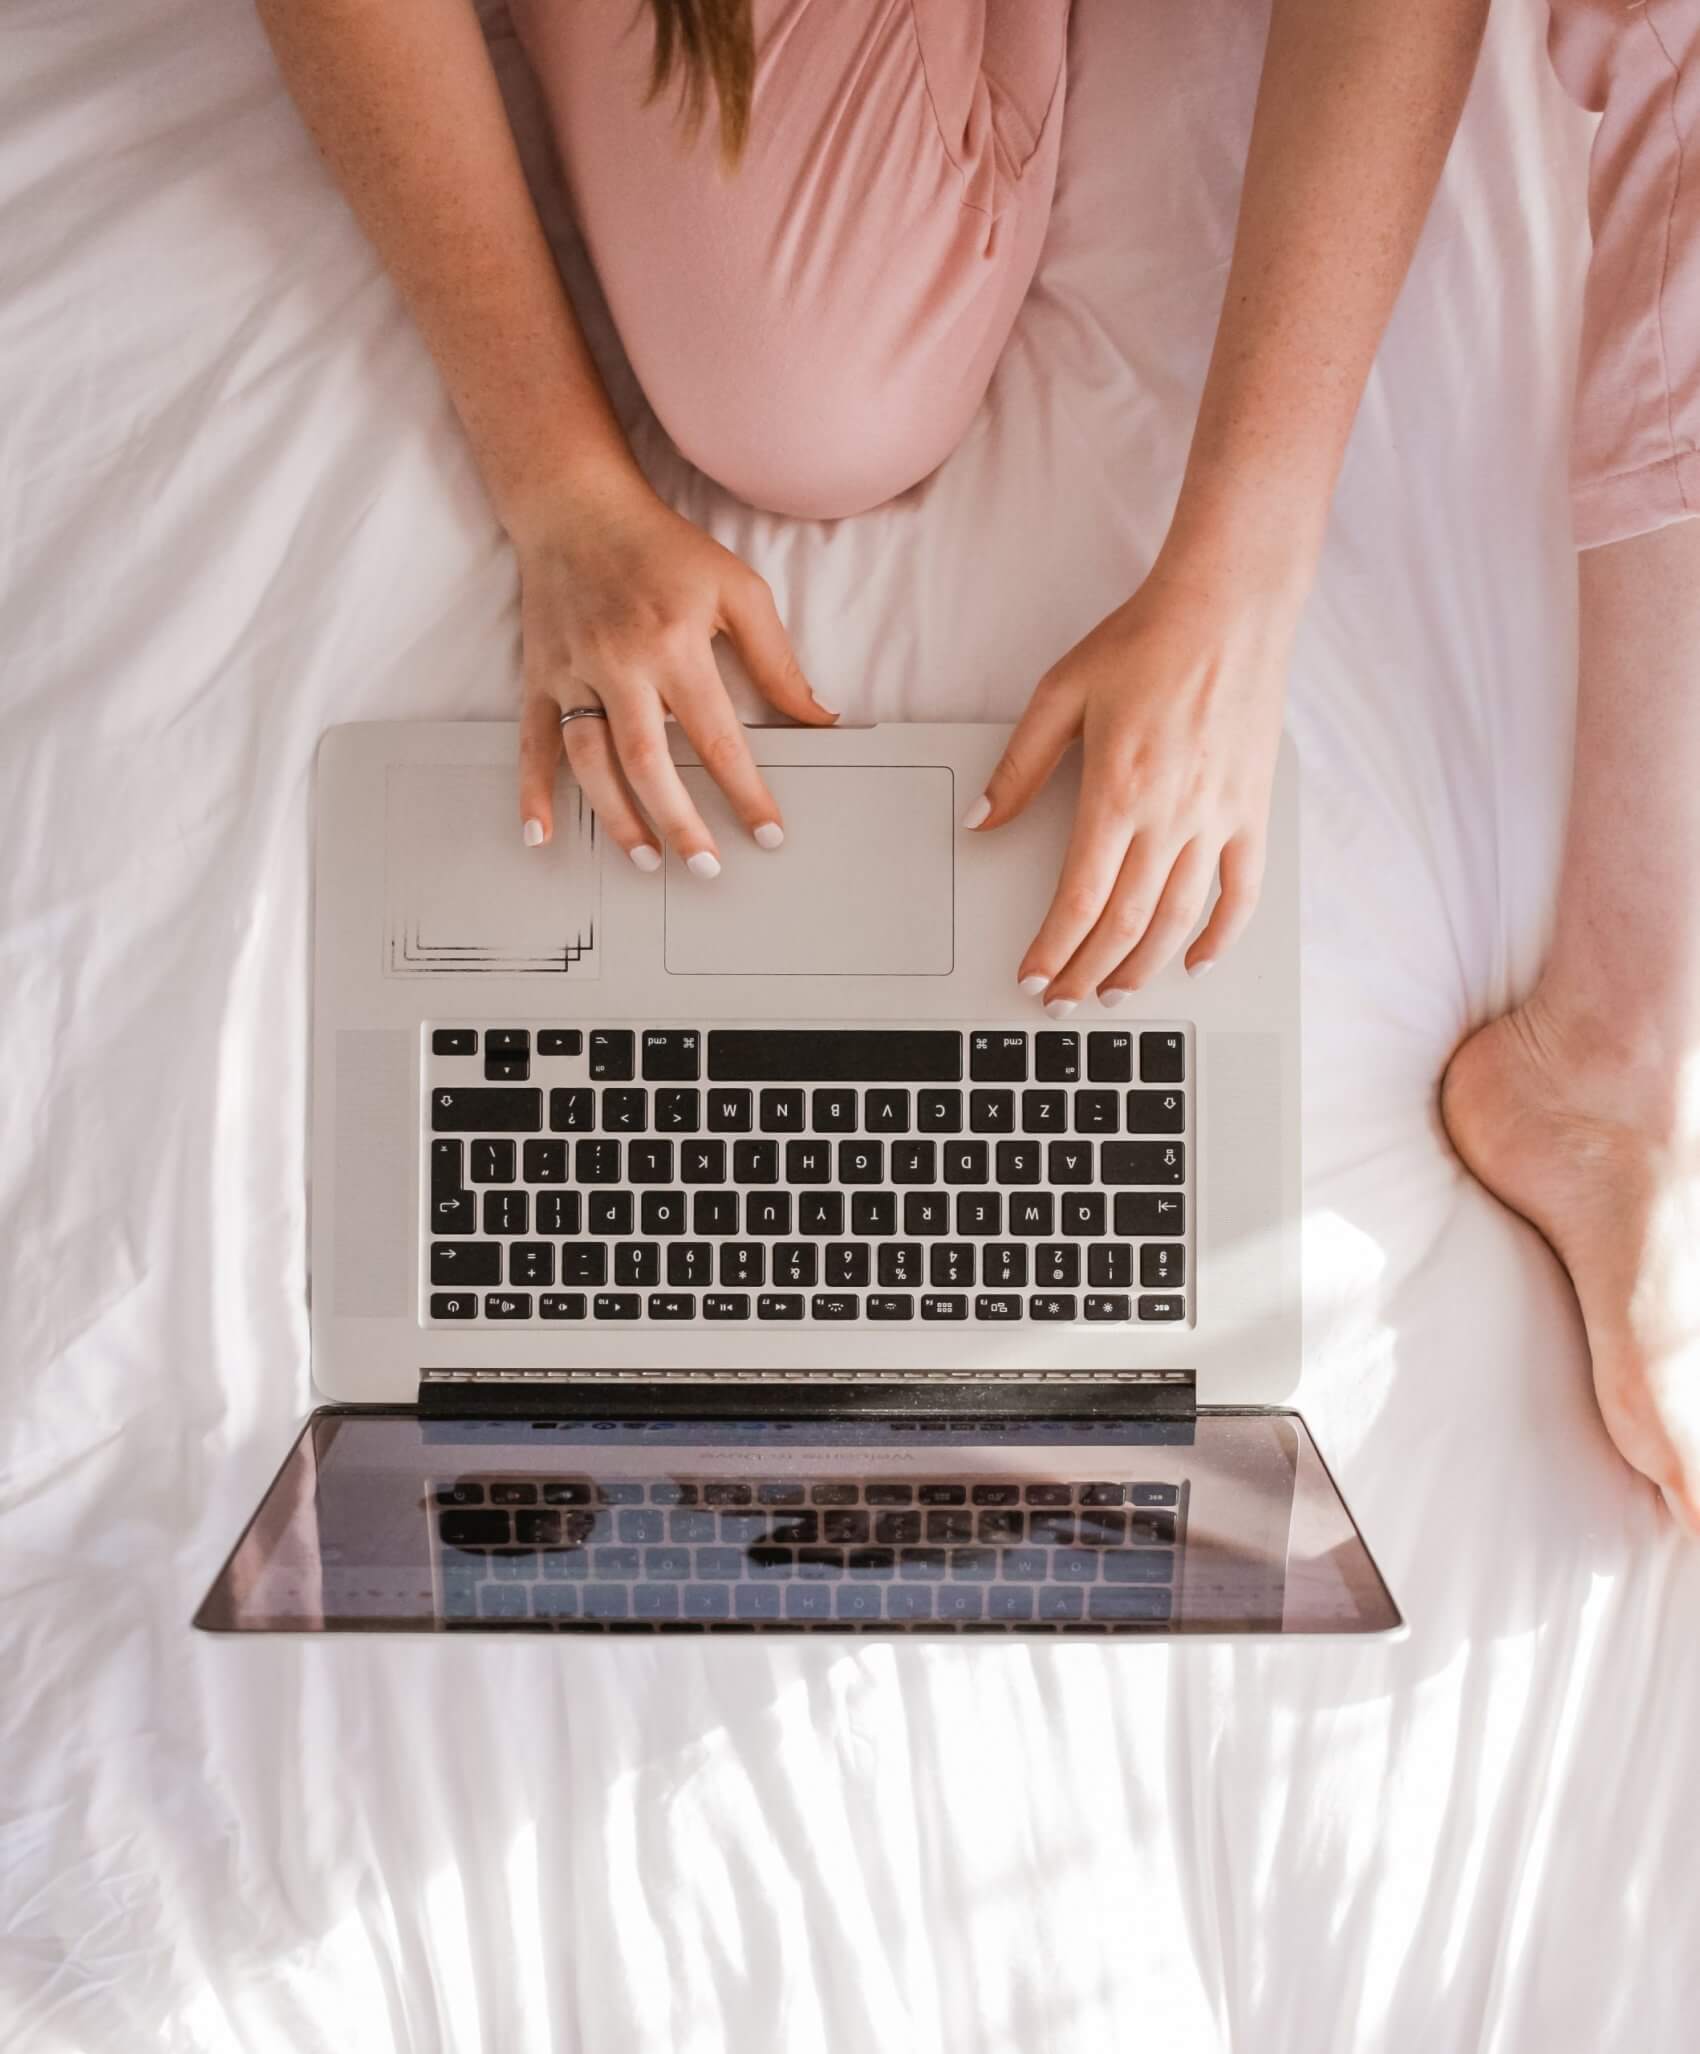 Female Sitting on Bed with Laptop